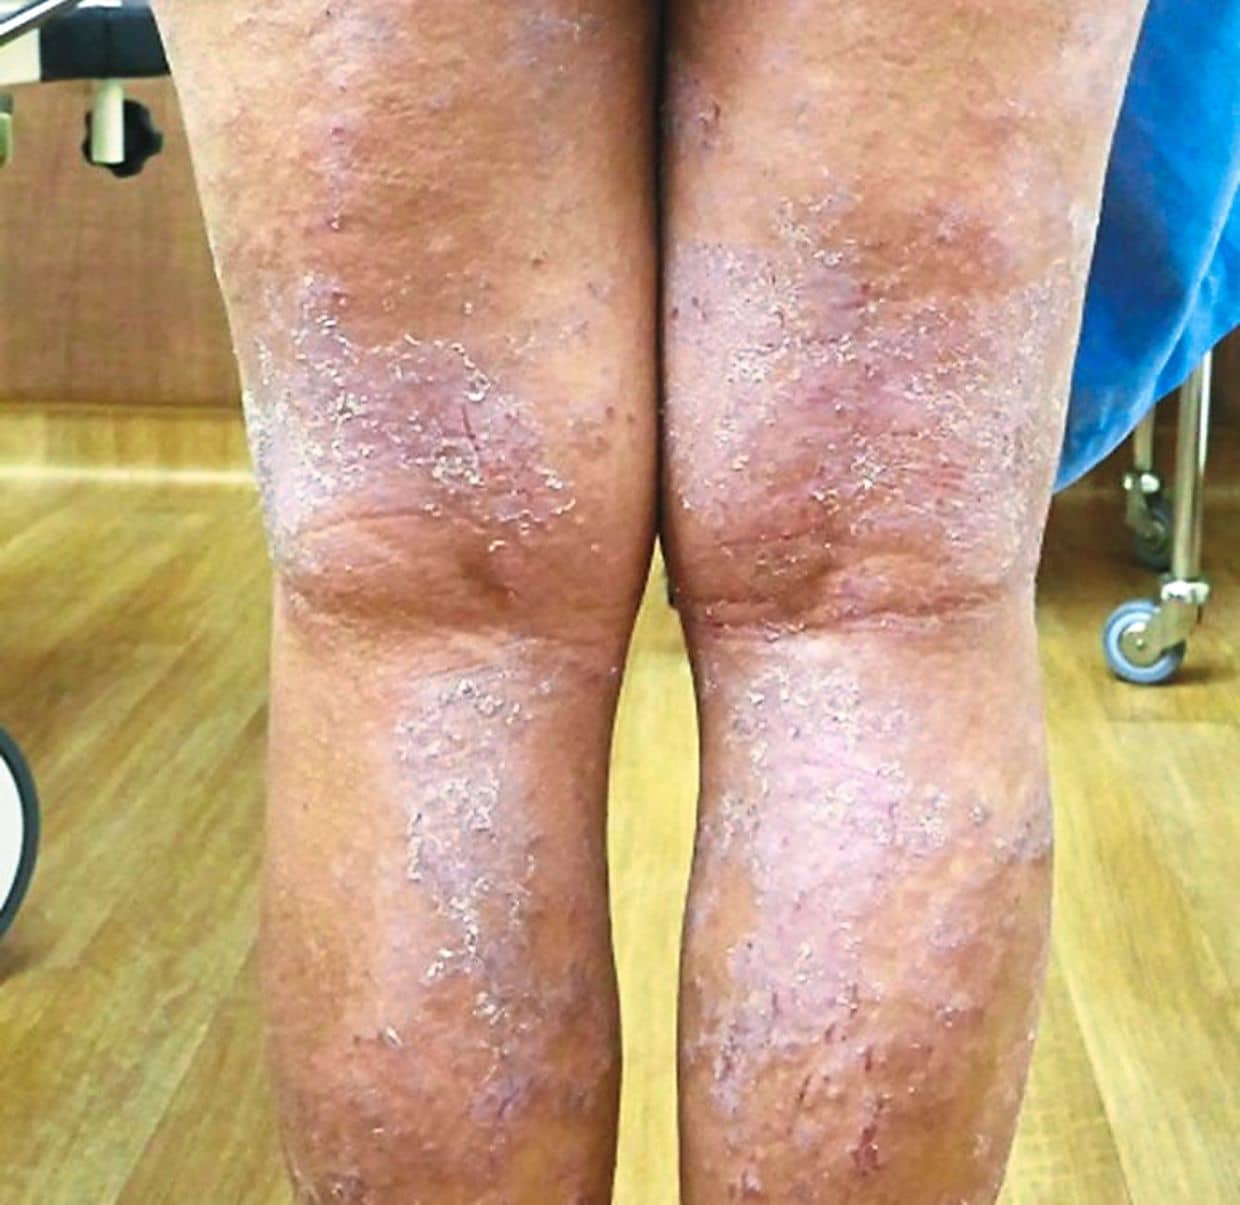 A new treatment for atopic dermatitis or eczema